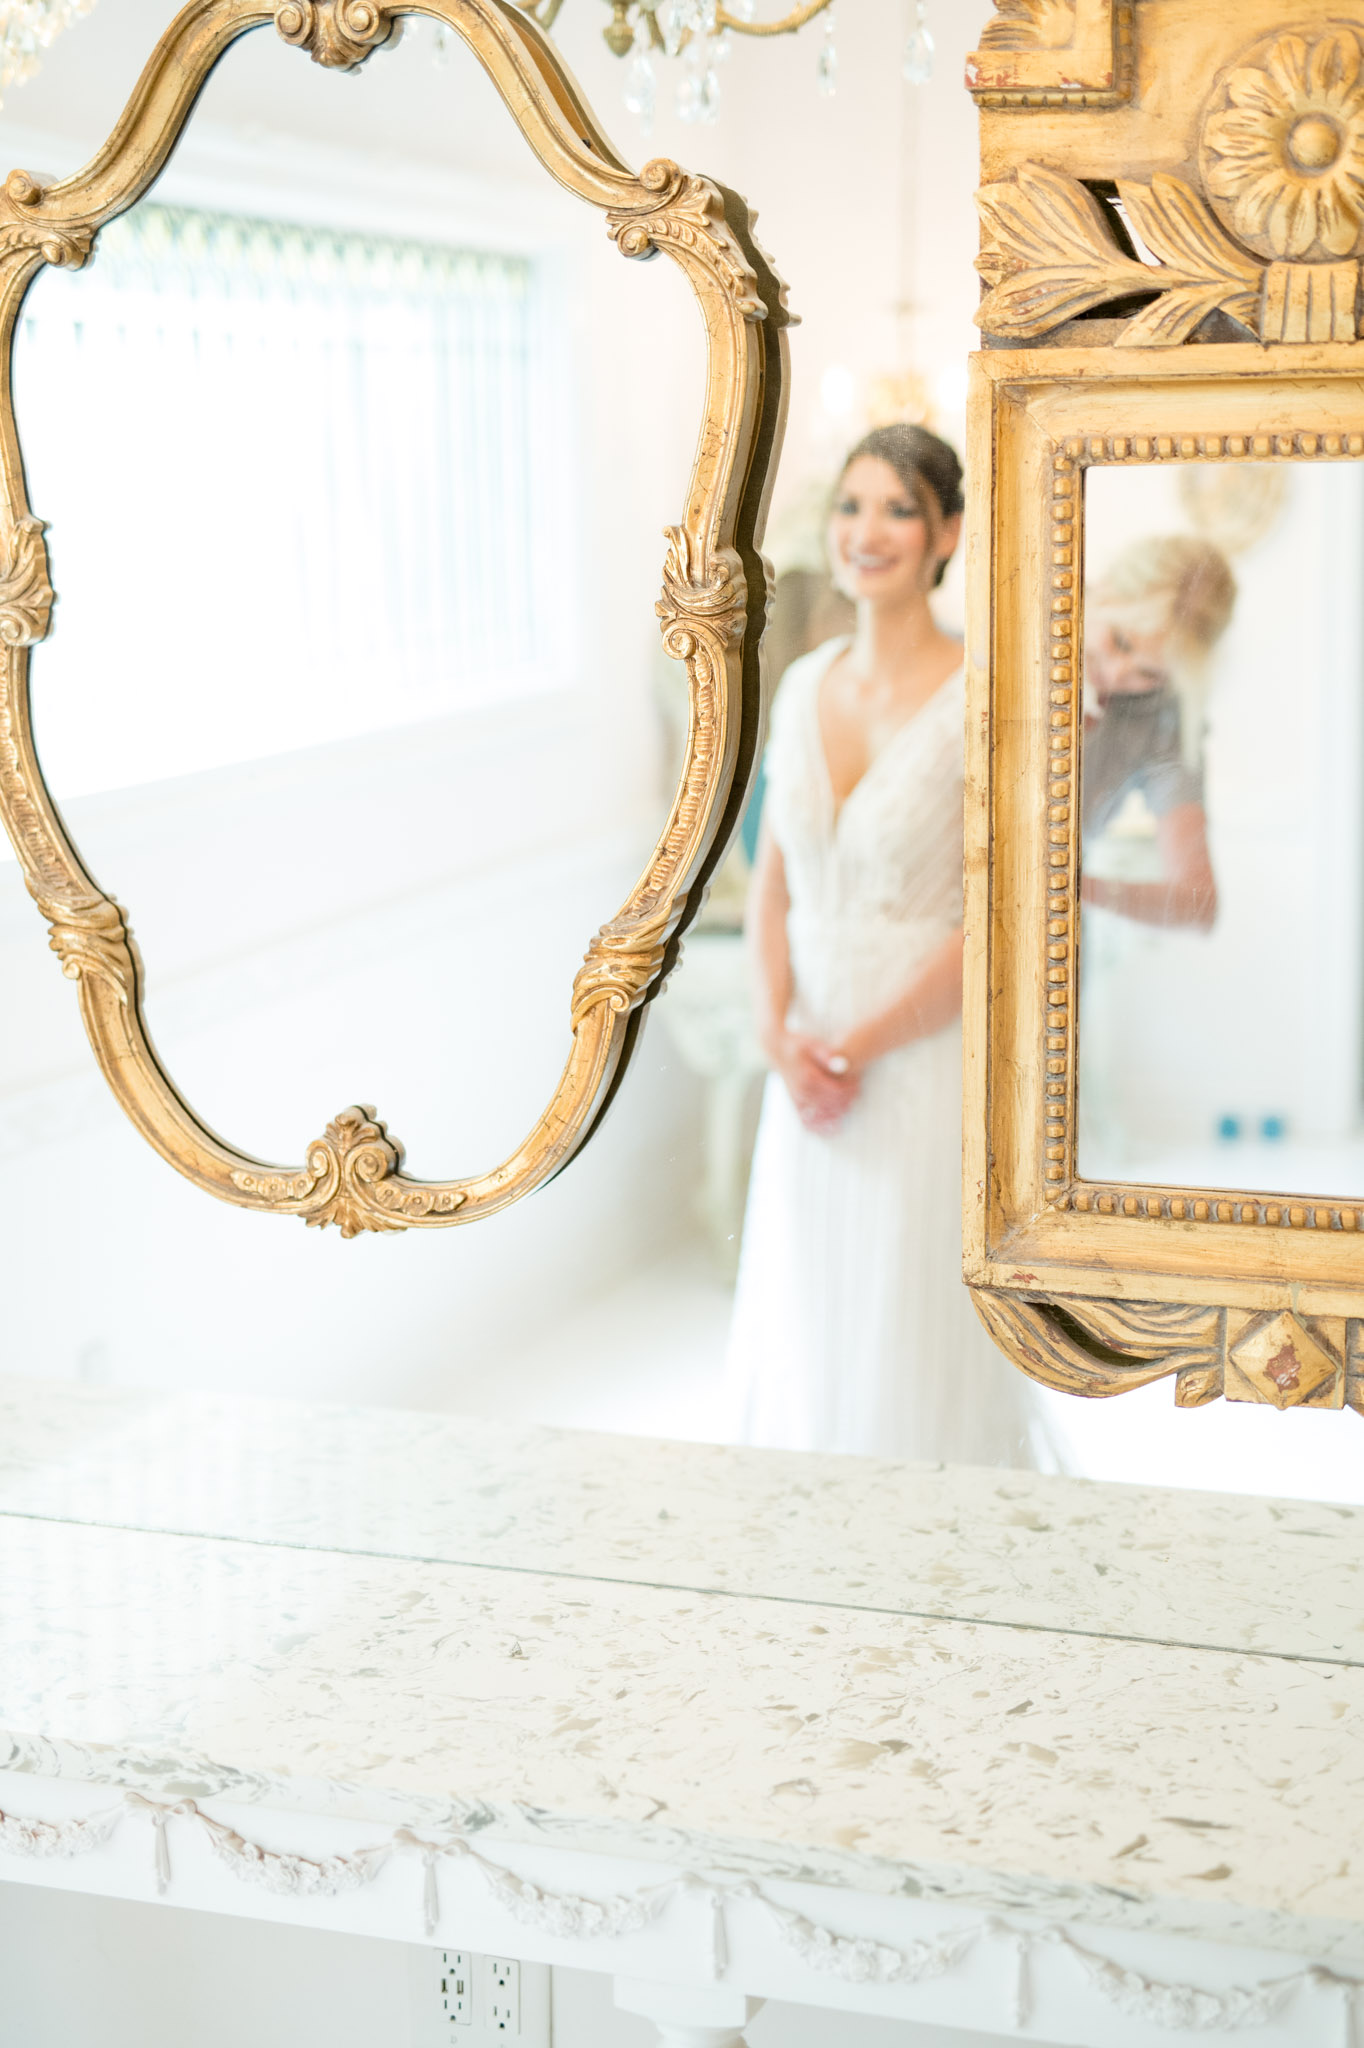 Reflection of bride in mirror while she gets ready.